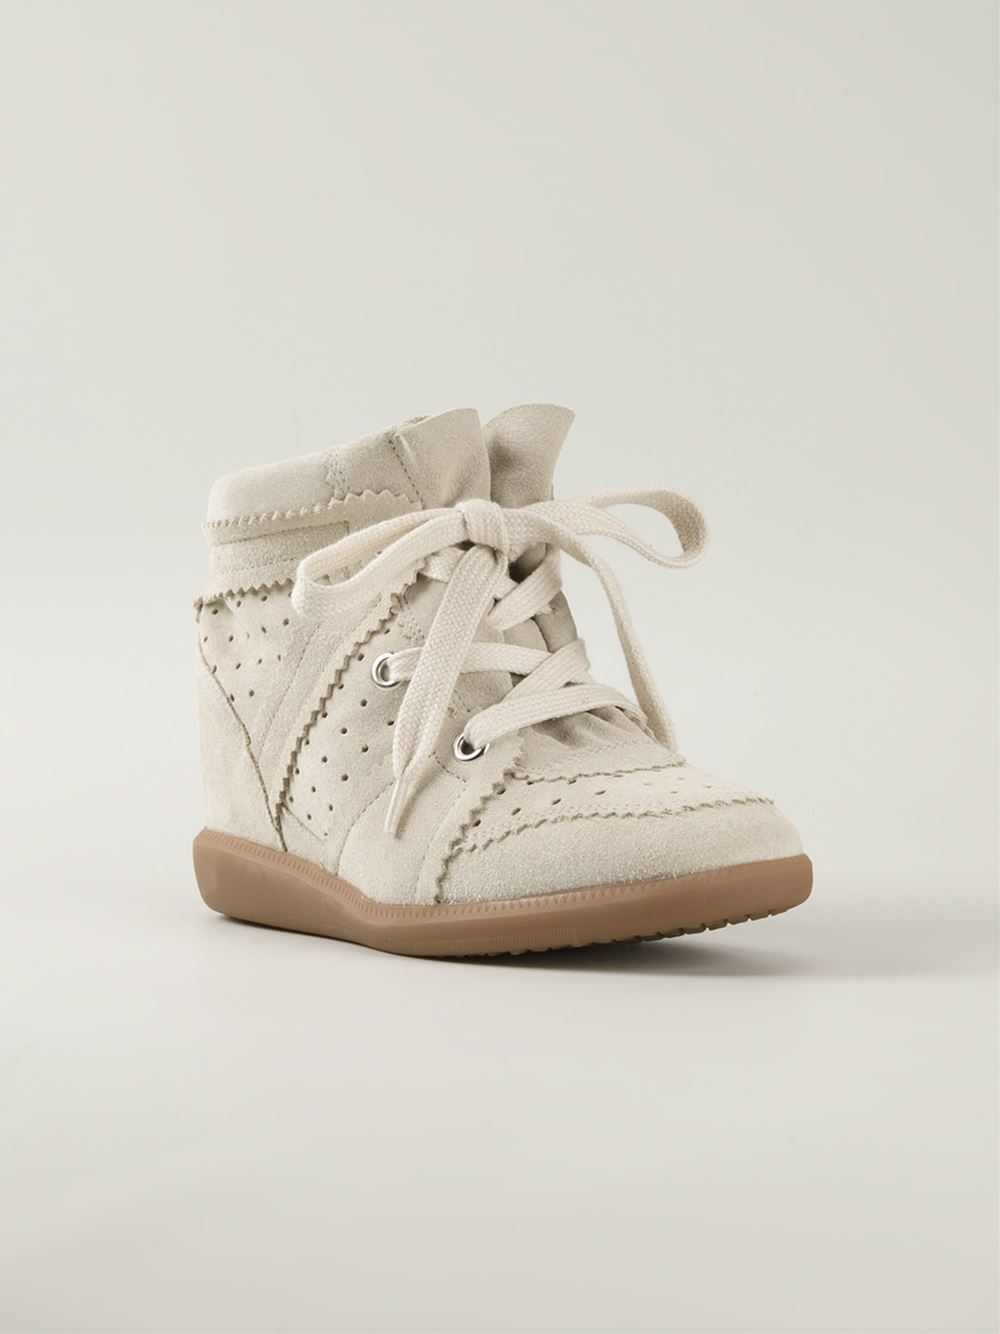 Étoile Isabel Marant 'Bobby' Wedge Sneakers in Natural - Lyst